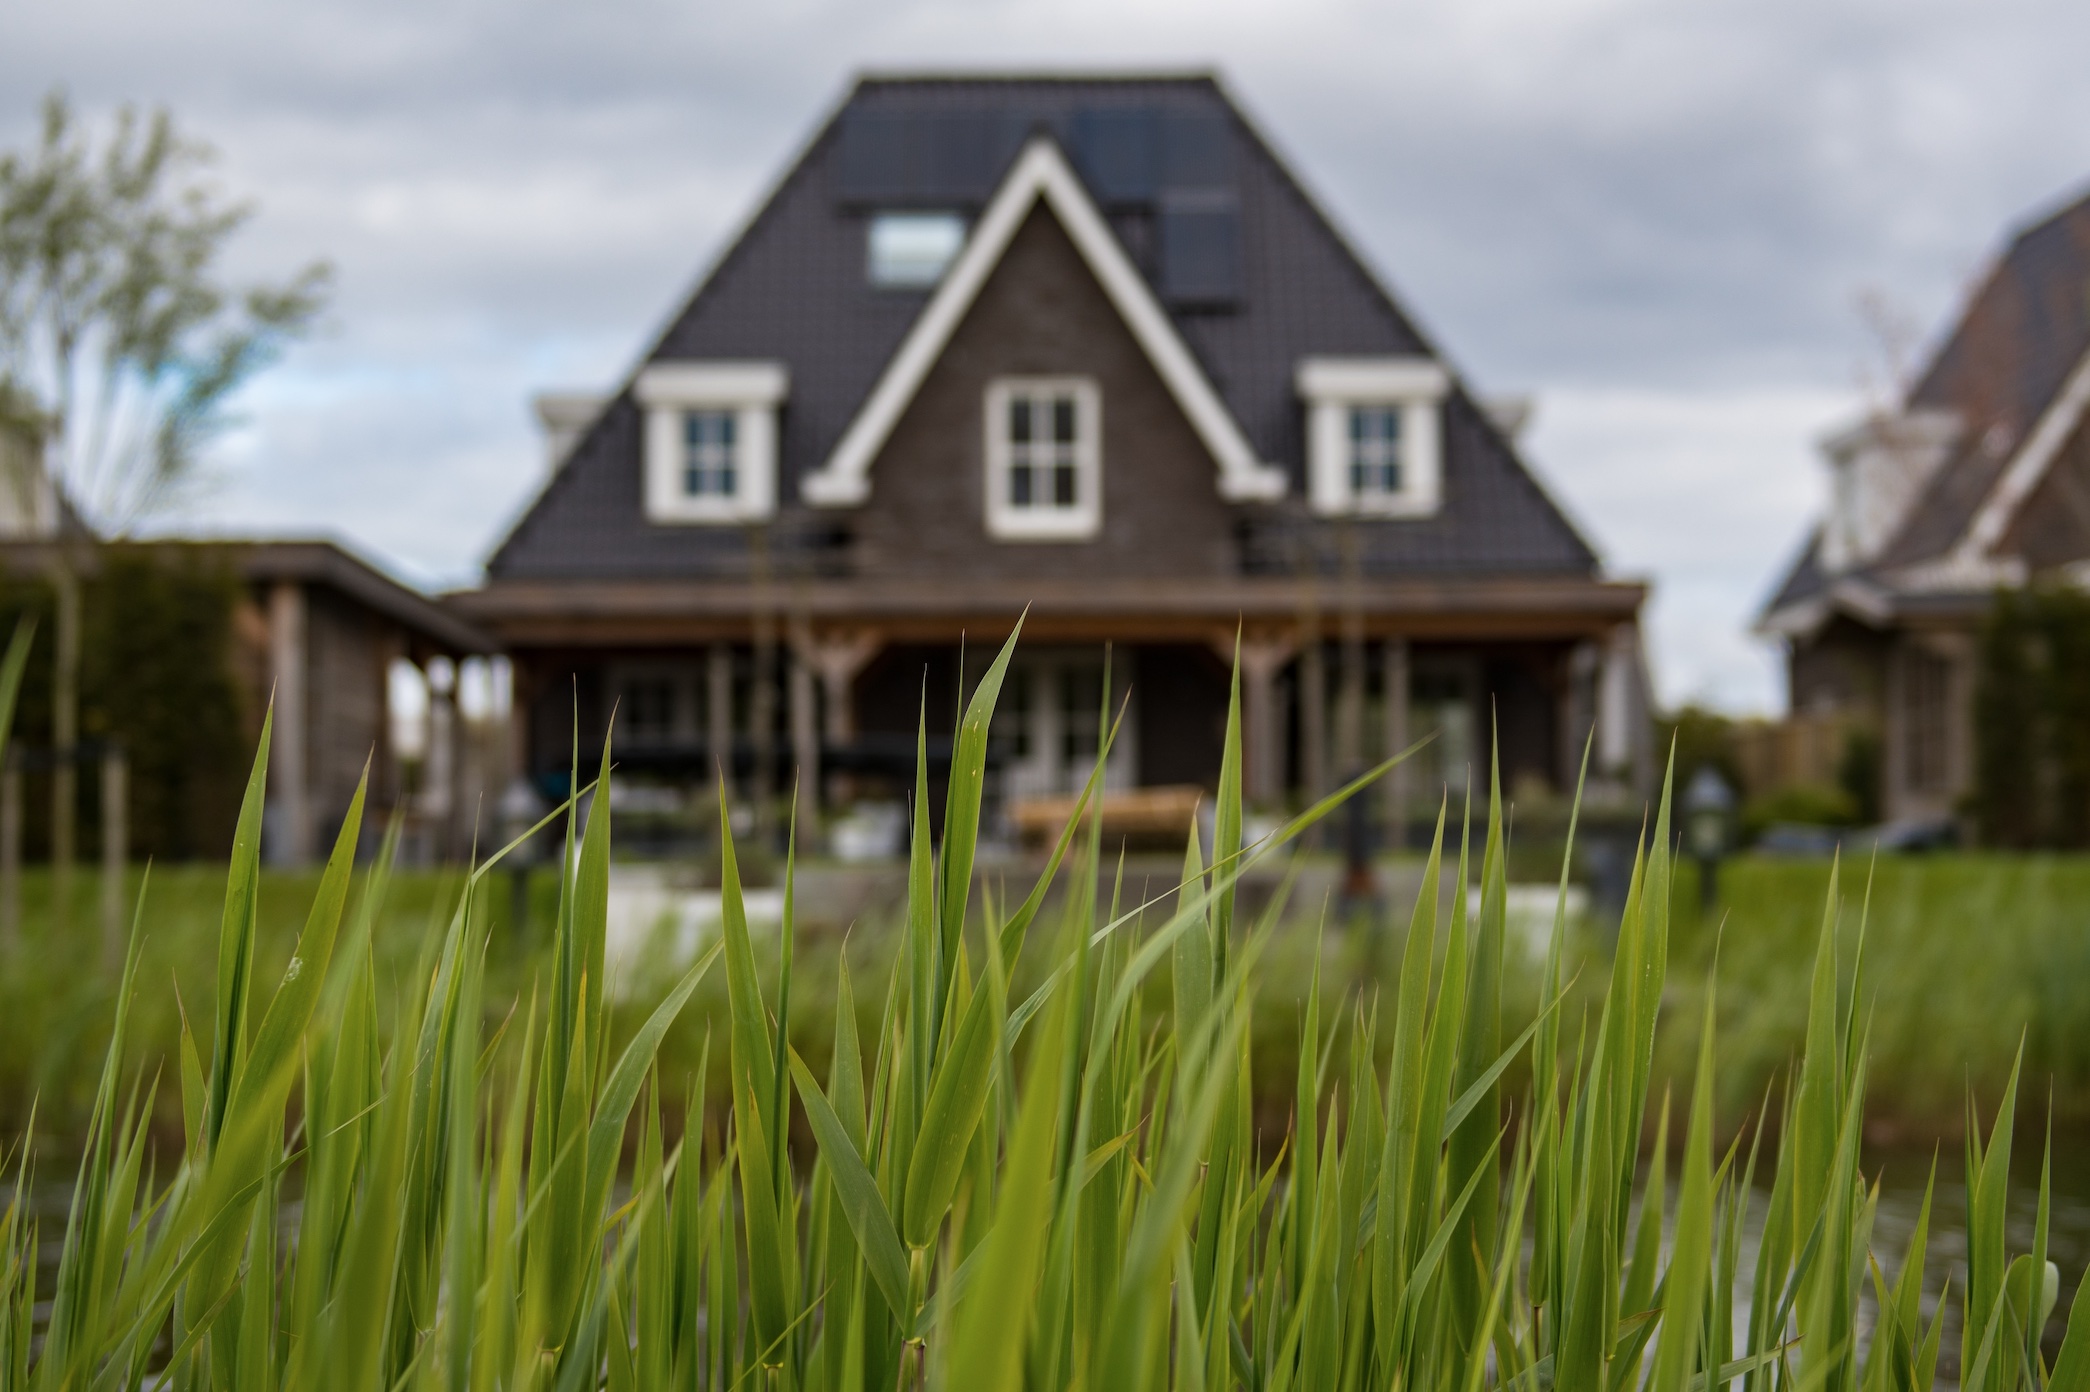 Soft focus shot of house, upclose of lawn at ground level in the foreground; image by Wynand Van Poortvliet, via Unsplash.com.